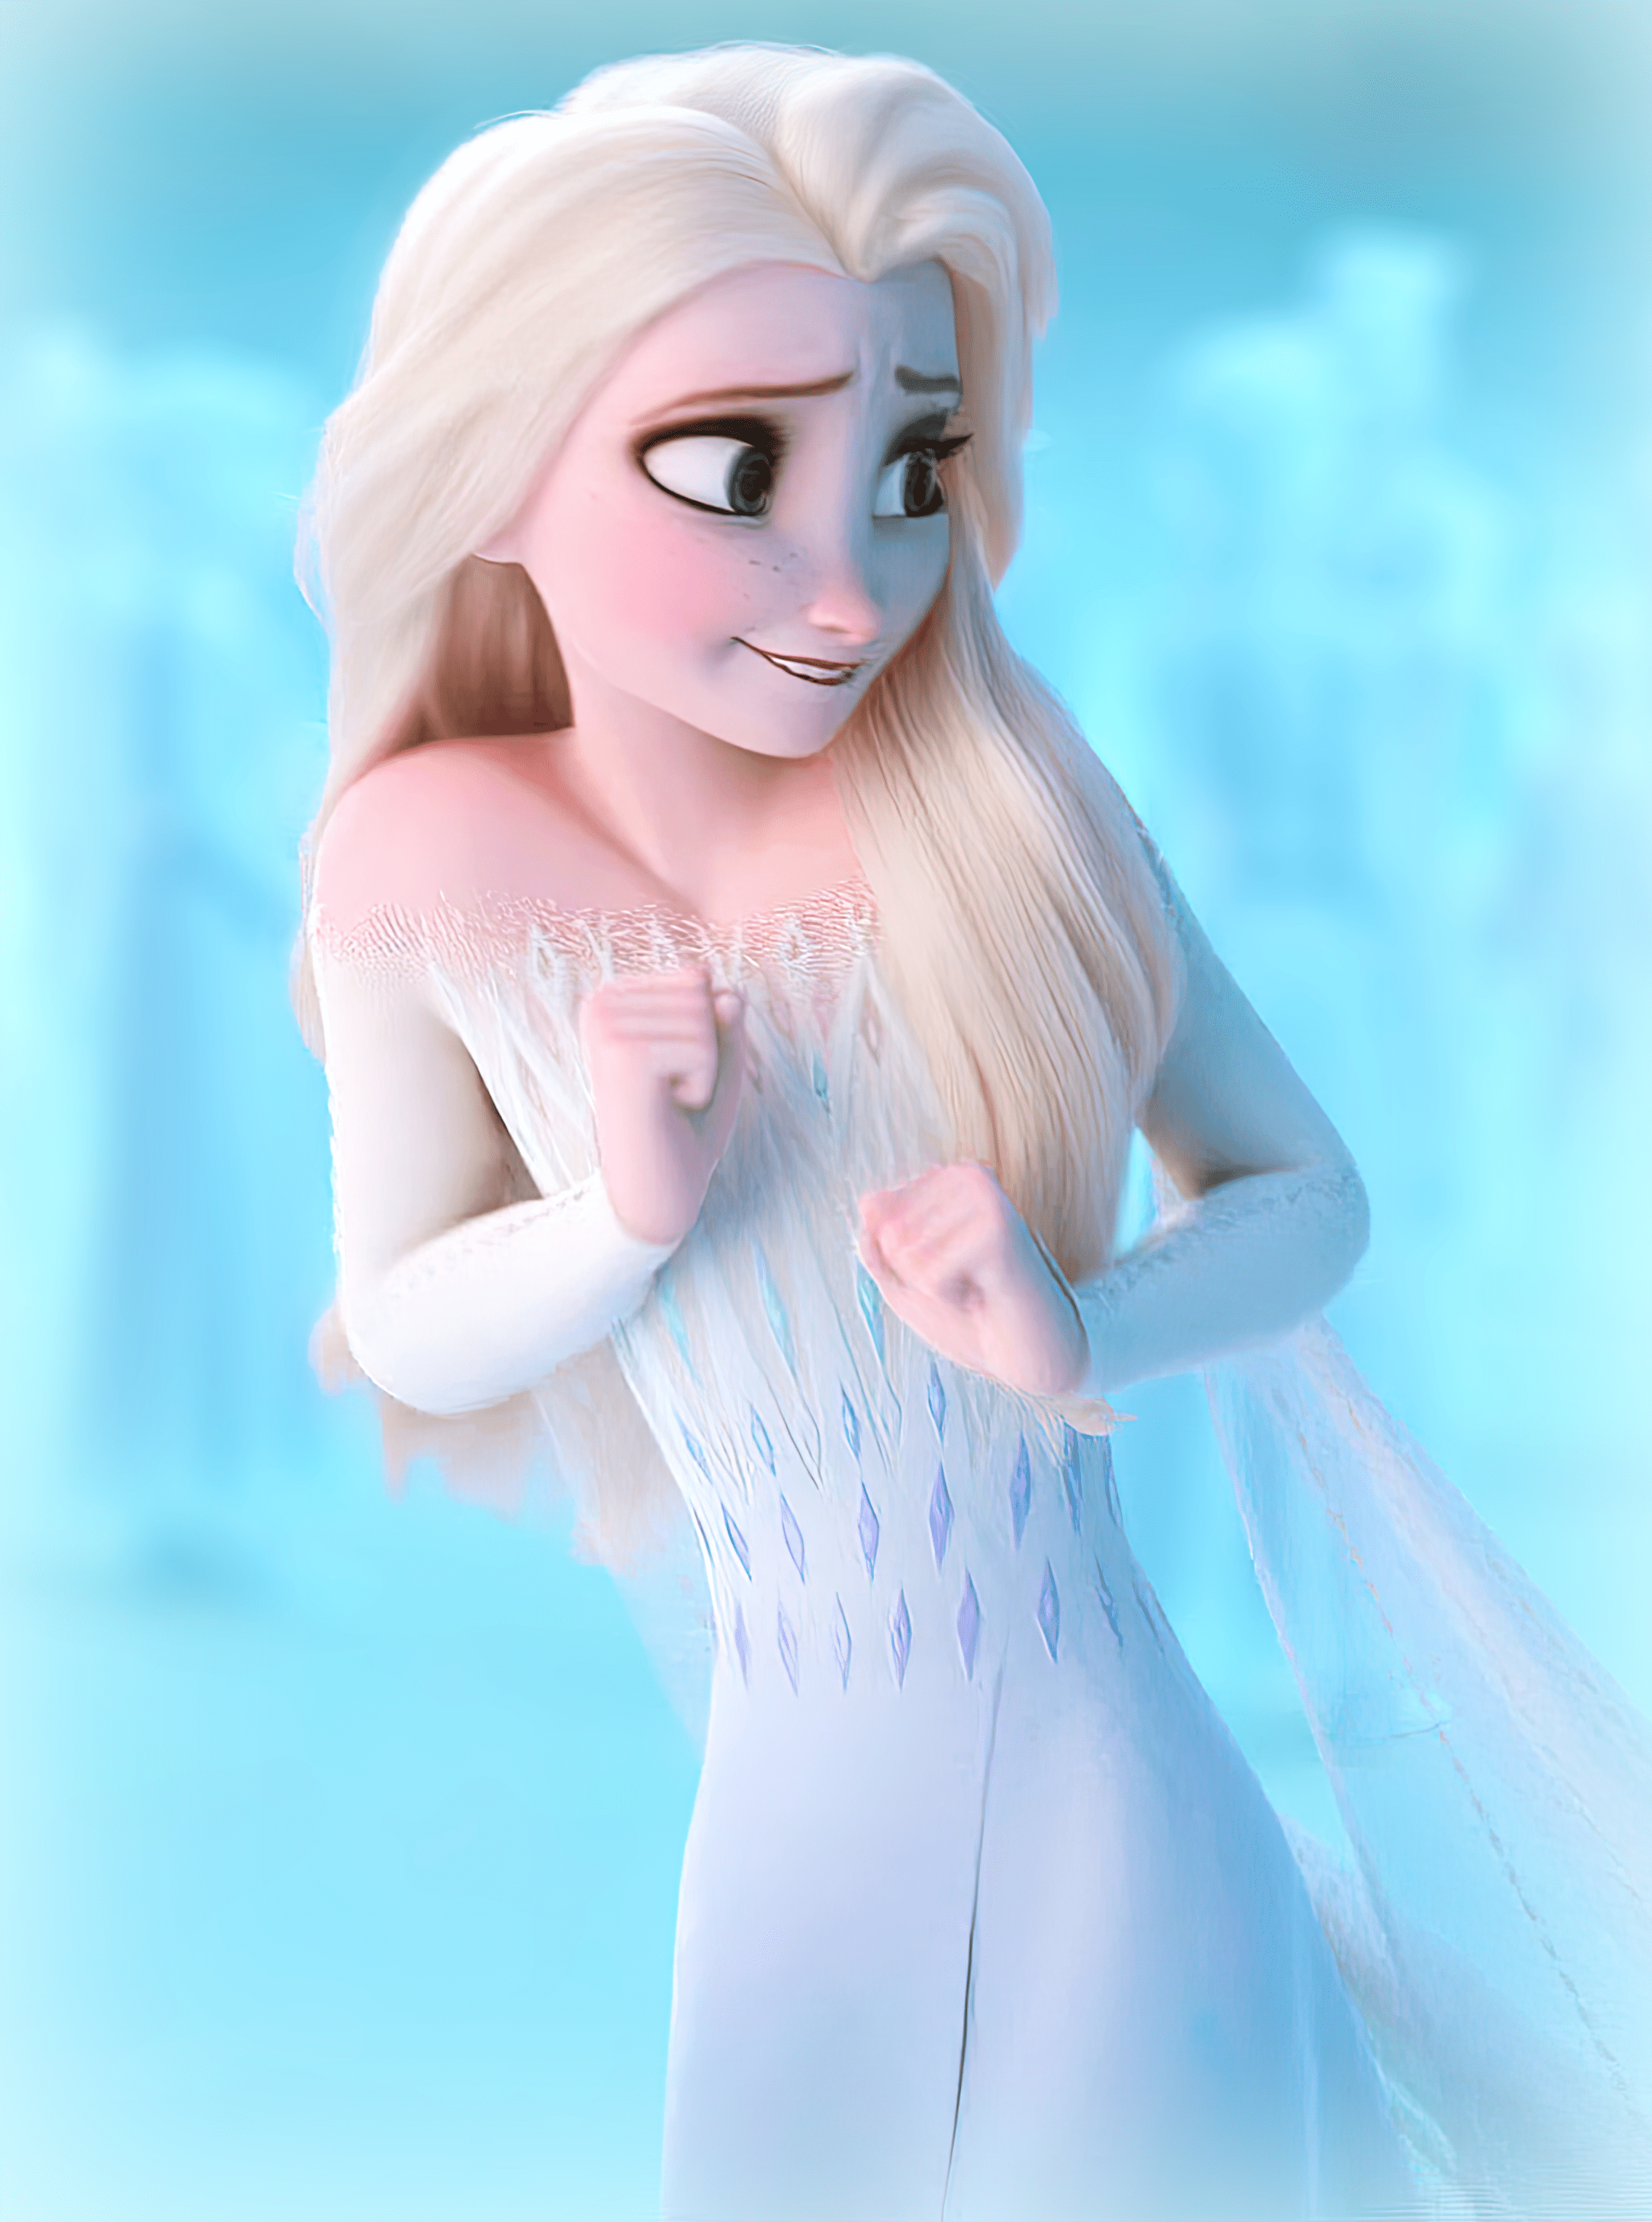 Blessing your feed with some happy Elsa edits